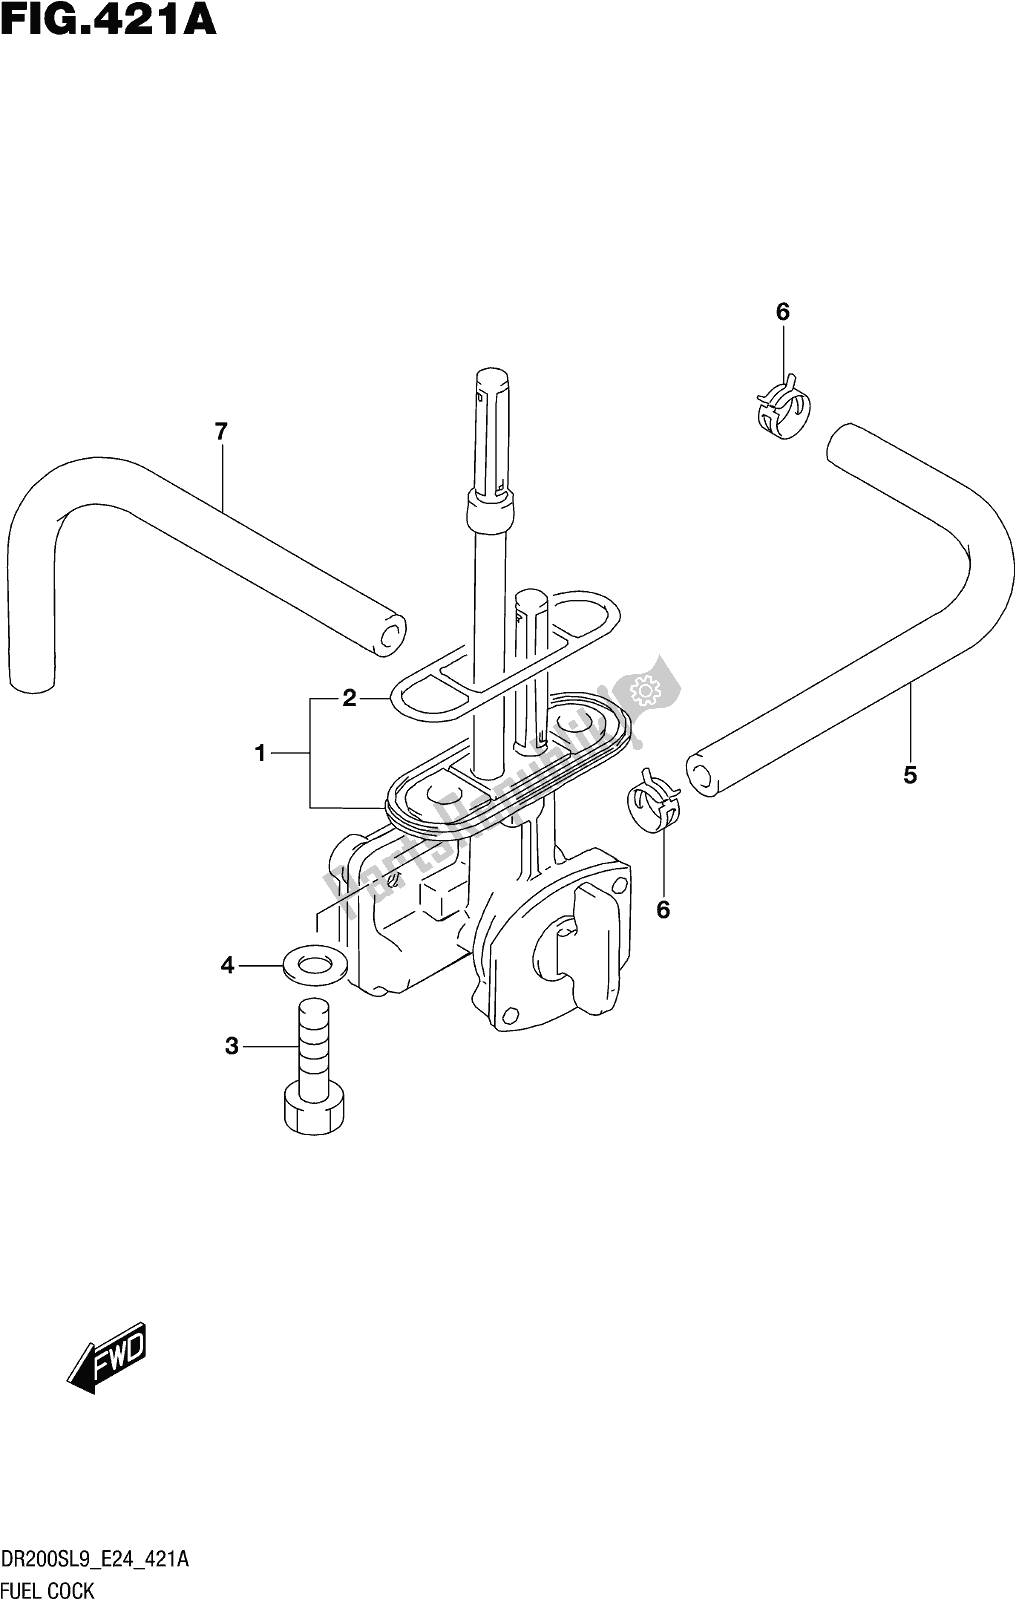 All parts for the Fig. 421a Fuel Cock of the Suzuki DR 200S 2019